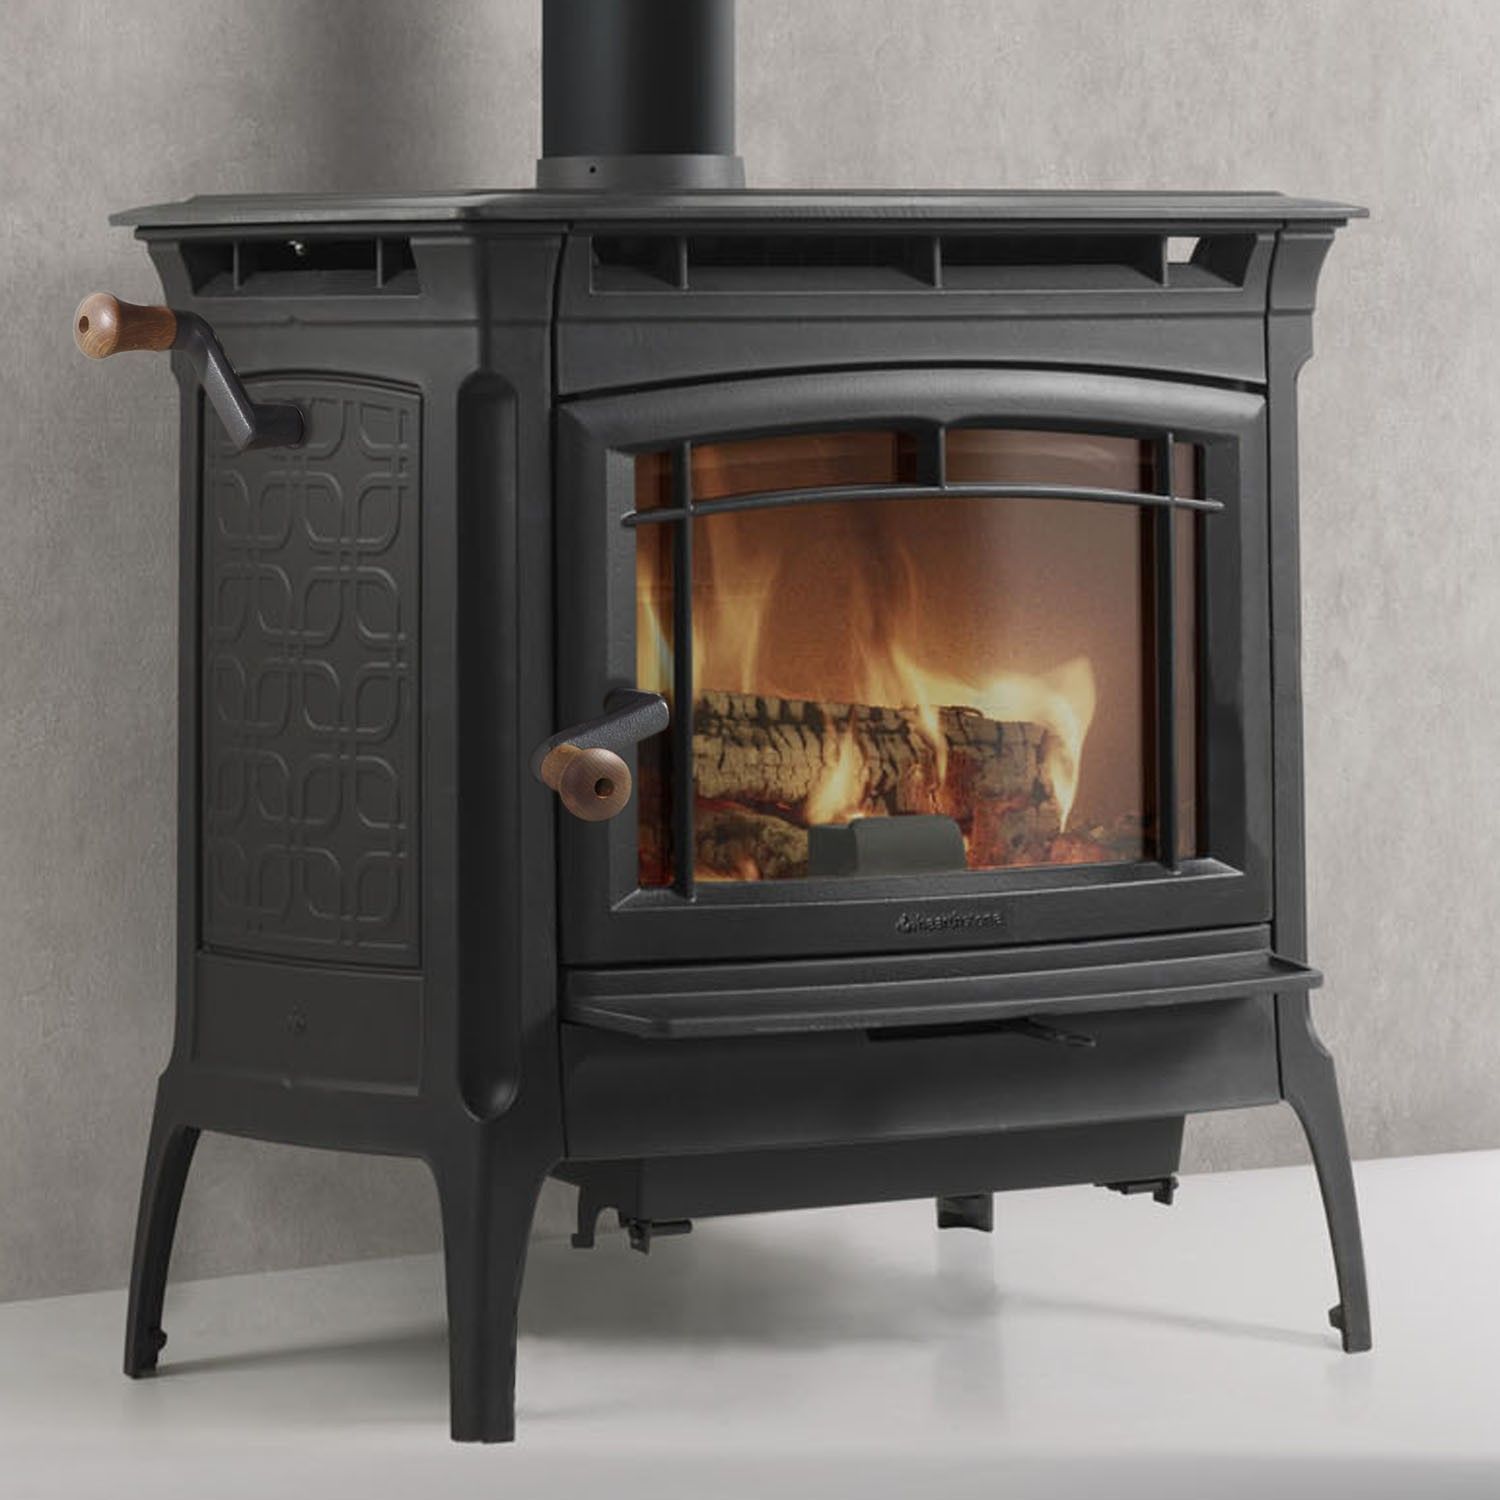 Fireplace Retailers Unique Pin by Do Wrocklage Harp On Home